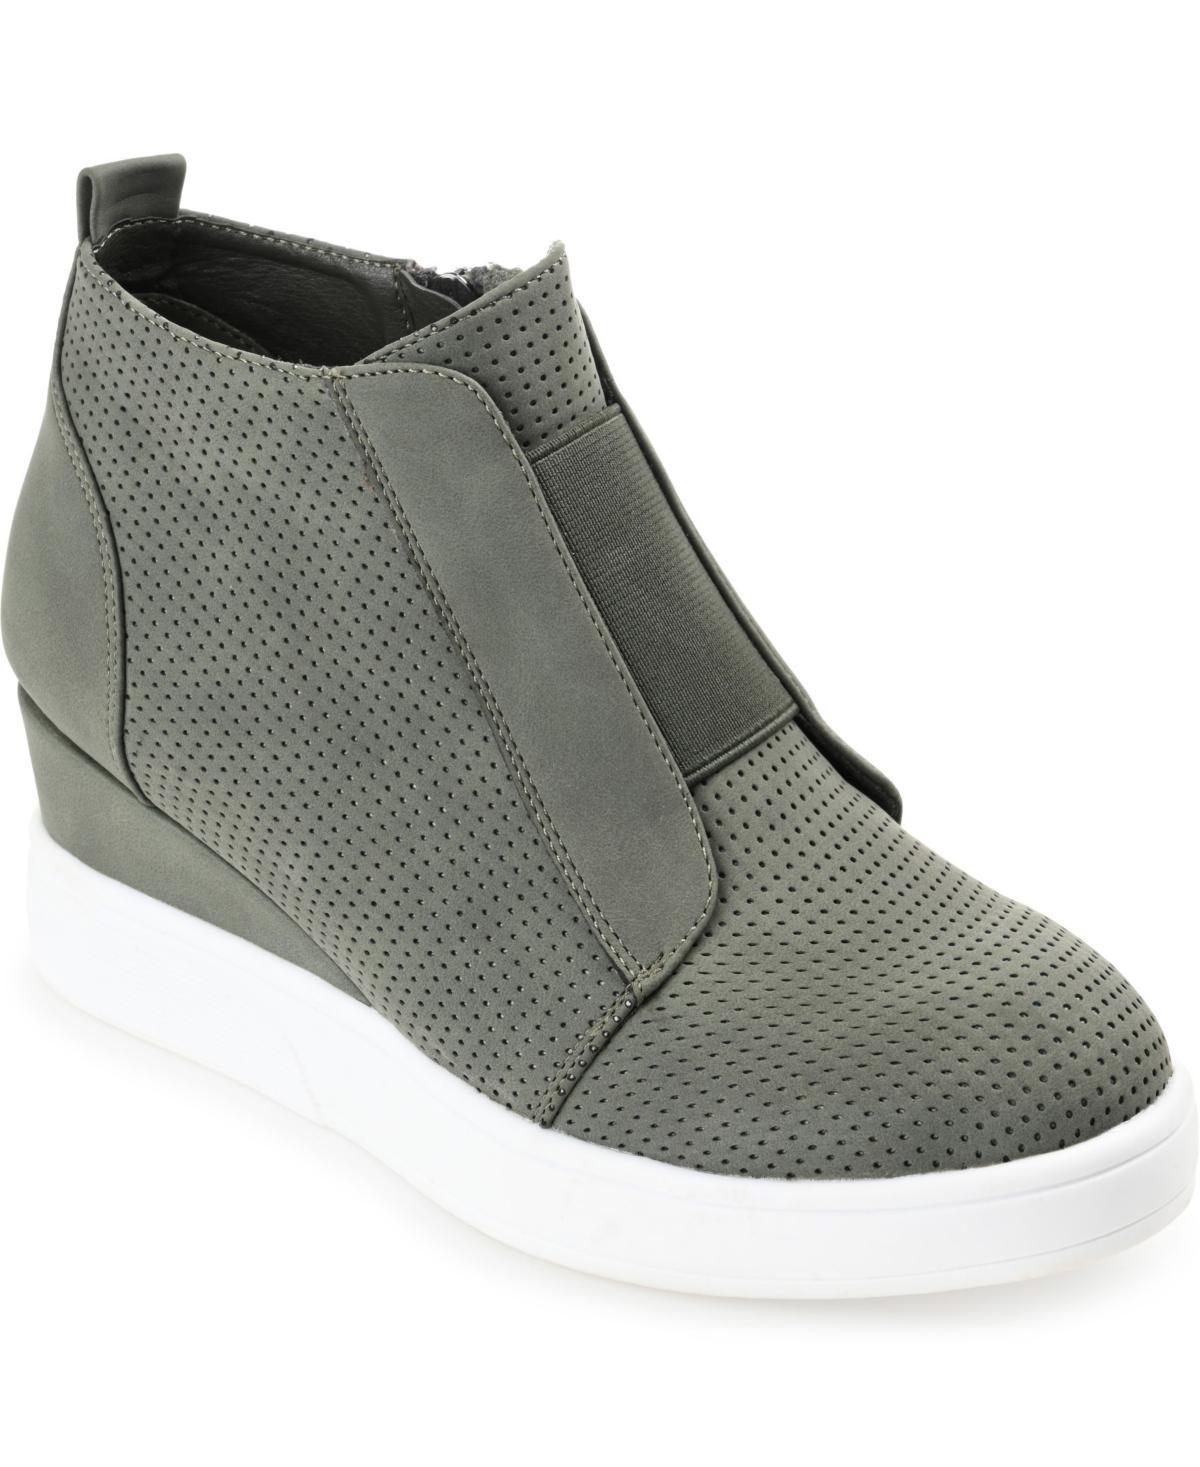 Journee Collection Clara Womens Wedge Sneakers Black Product Image